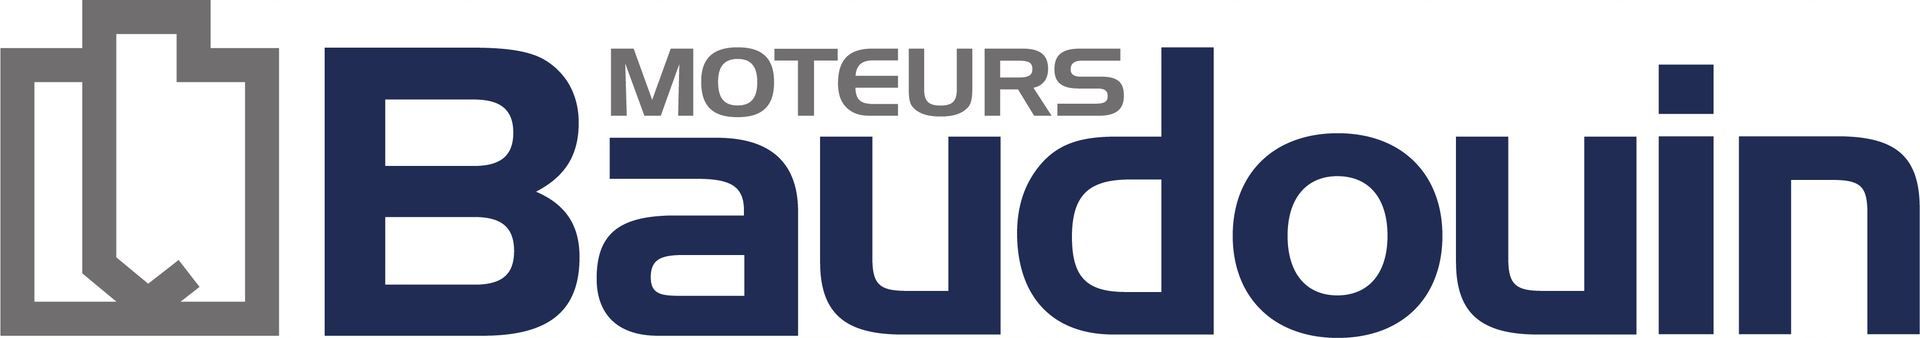 A blue and white logo for moteurs baudoin